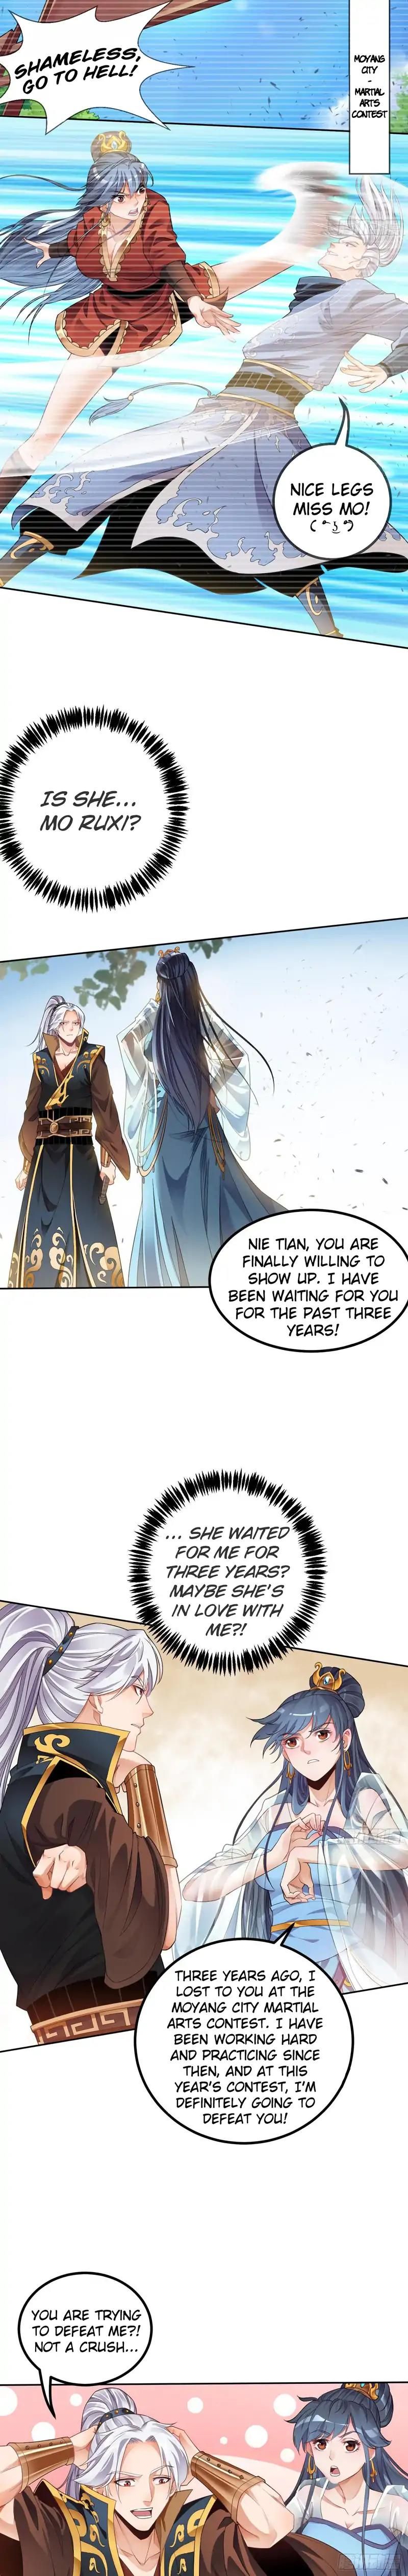 Eternal Emperor Chapter 6 page 6